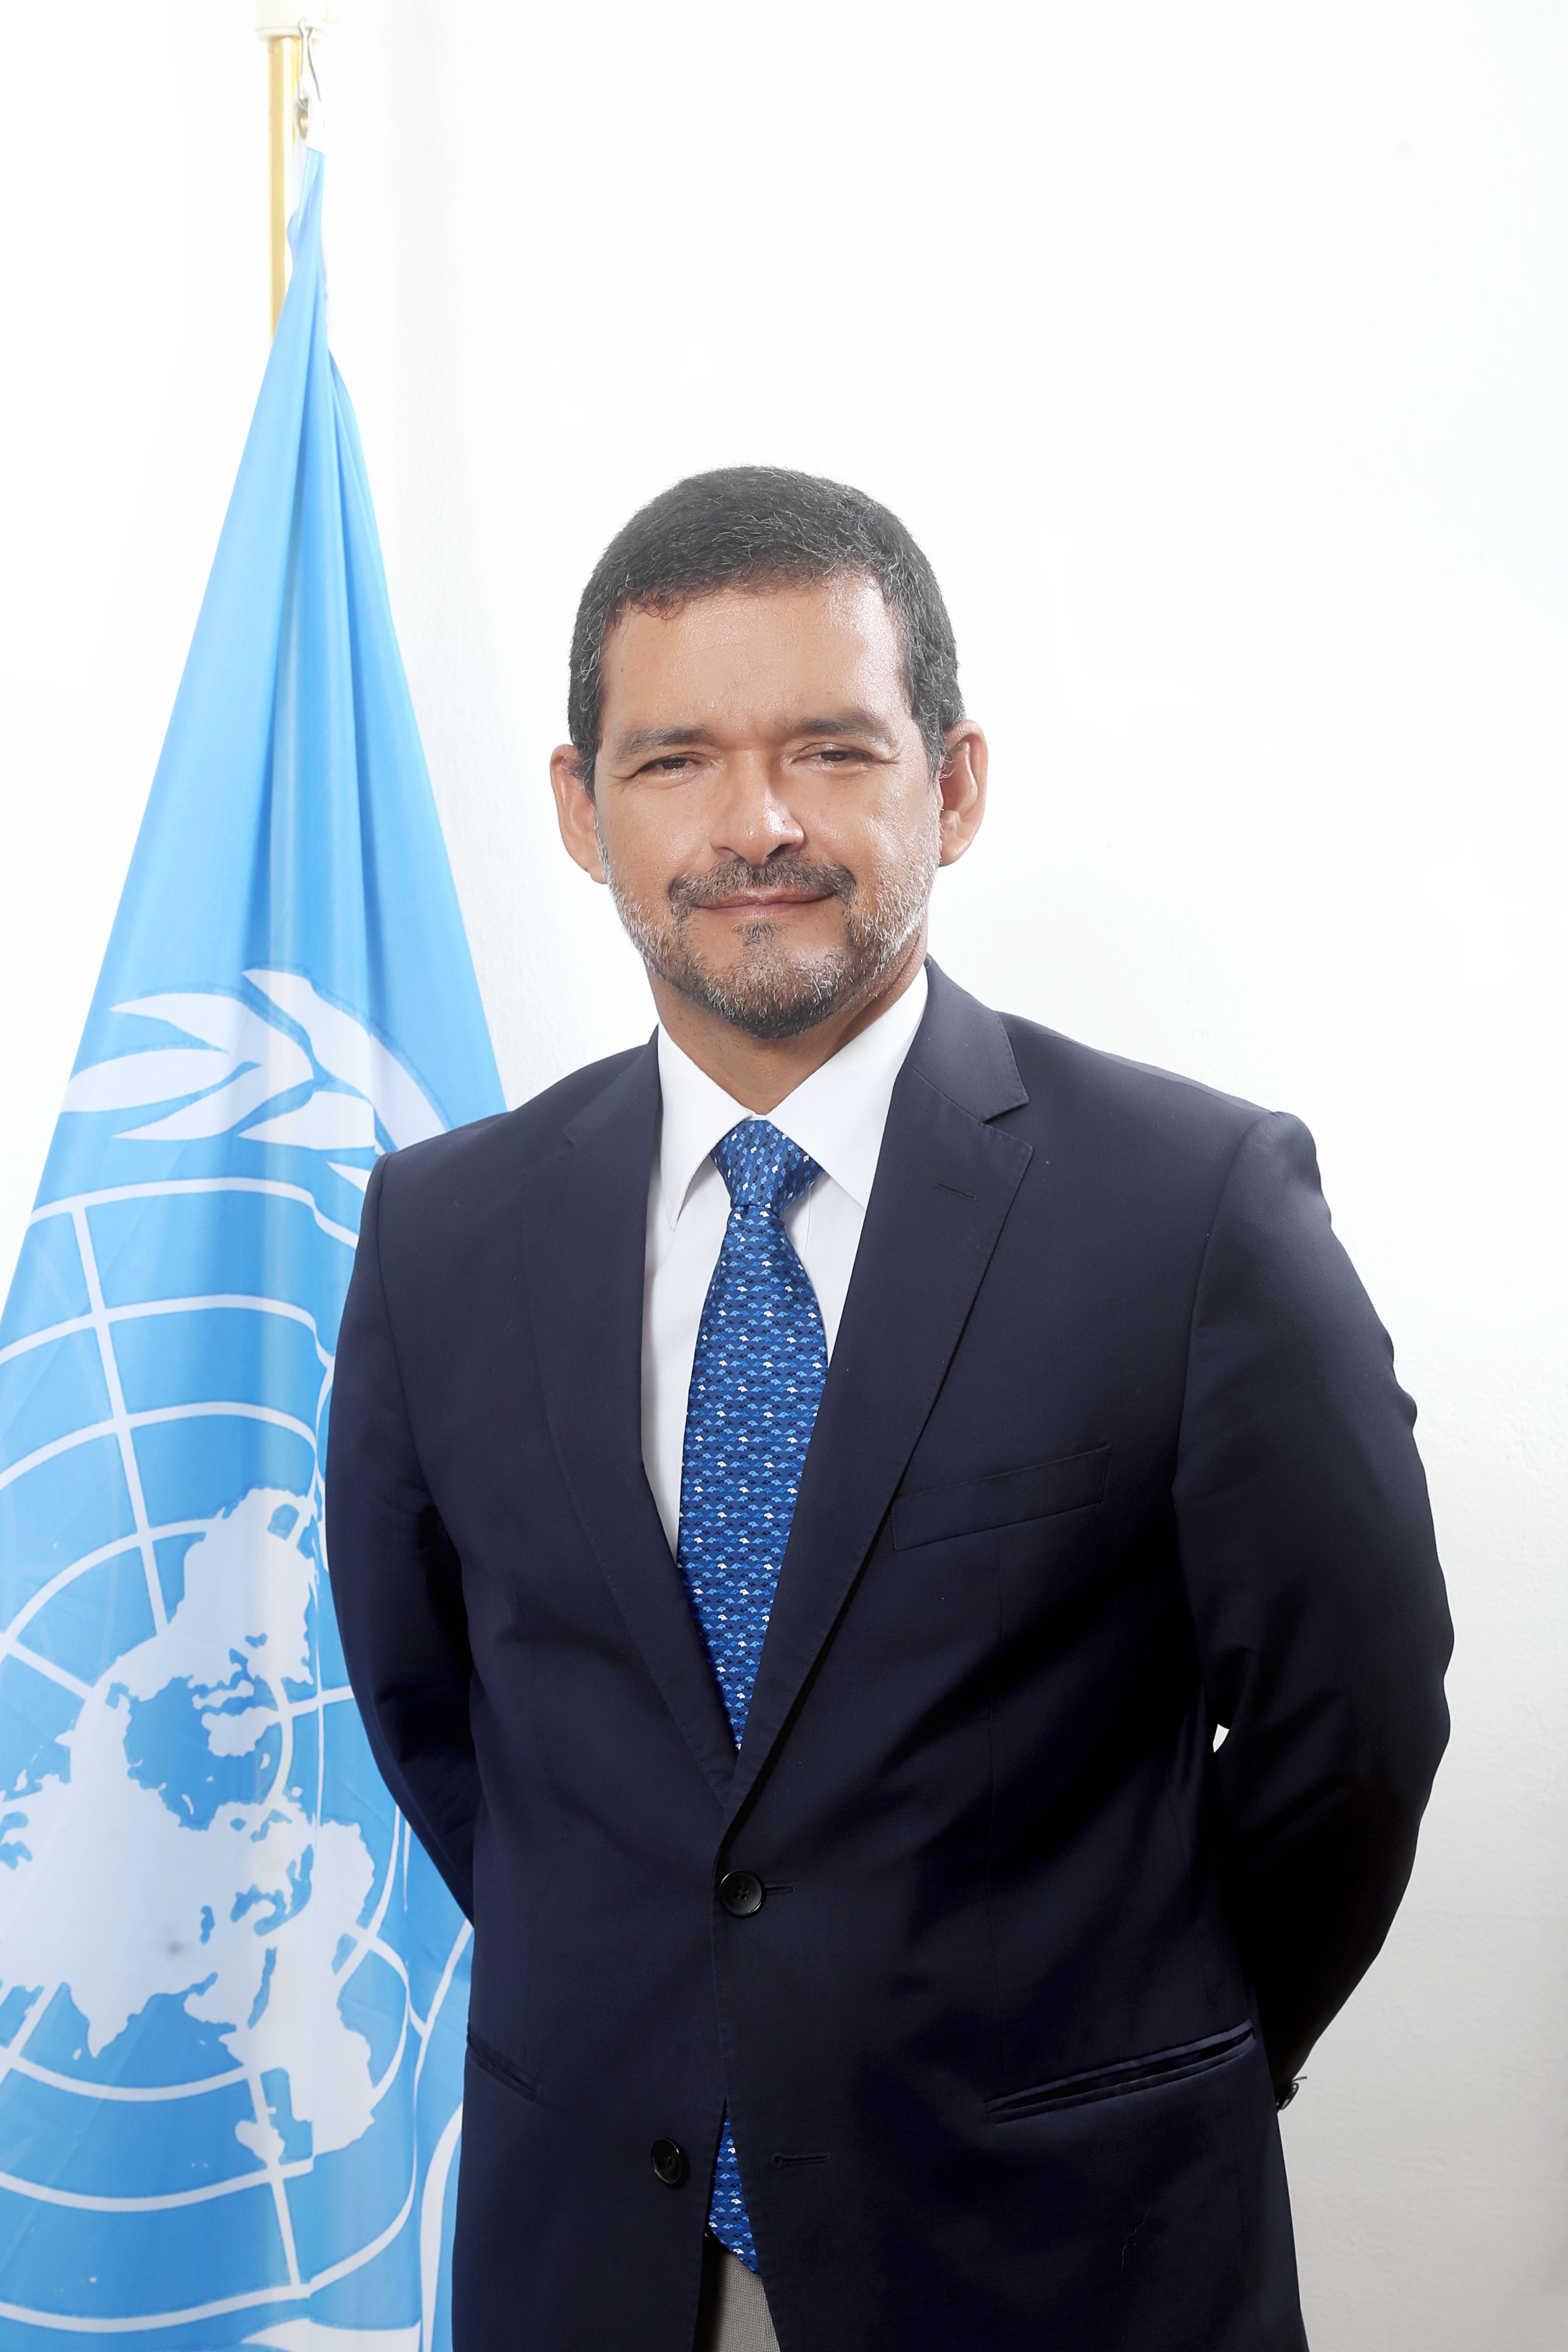 The Secretary-General appoints Mr. Raul Salazar of Peru as the United Nations Resident Coordinator in Belize and El Salvador